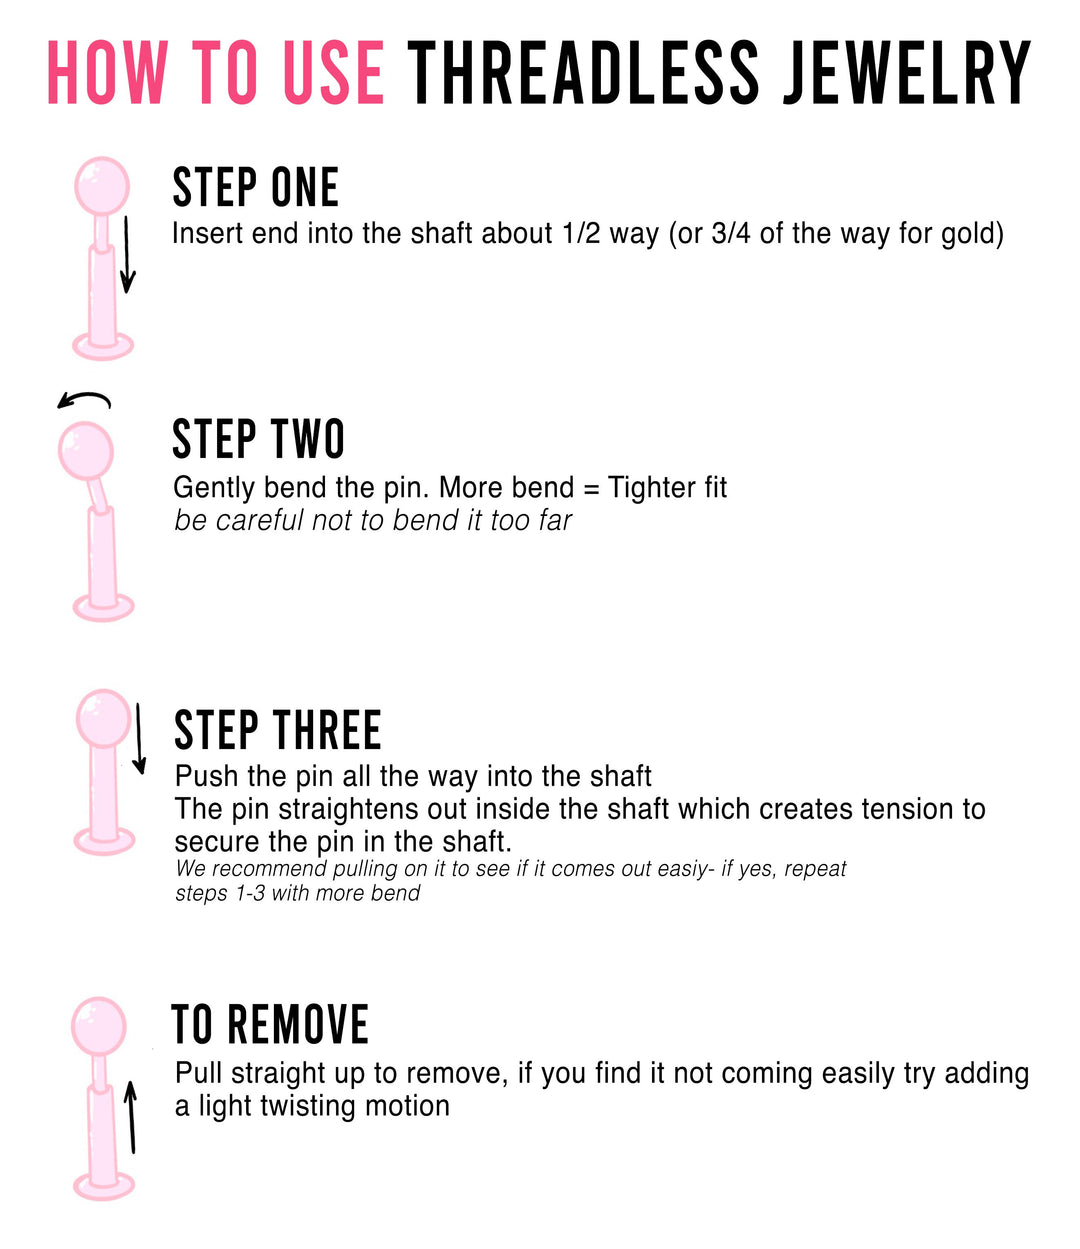 how to use and remove threadless jewelry